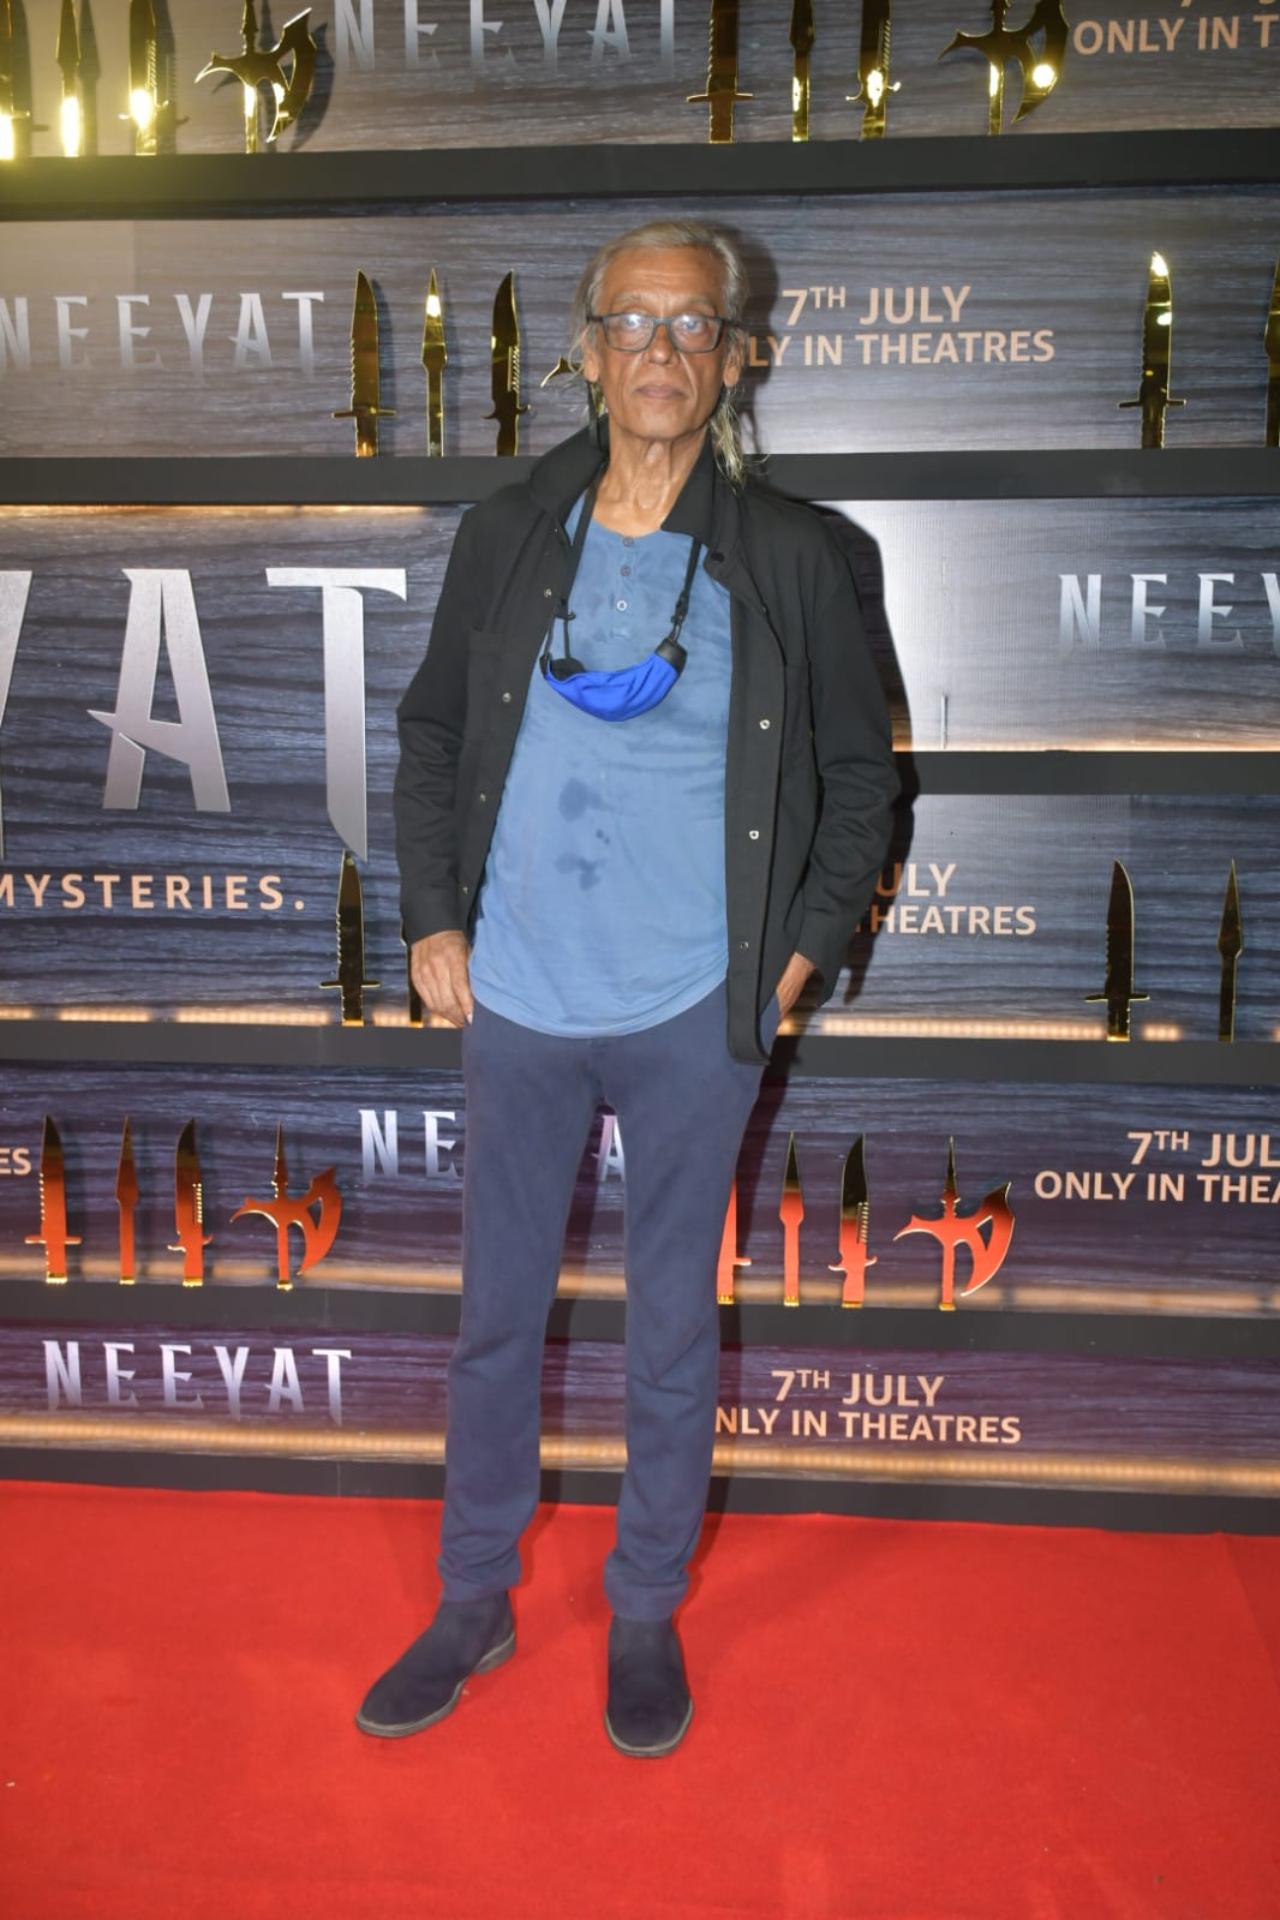 Director Sudhir Mishra also made his presence felt at the screening